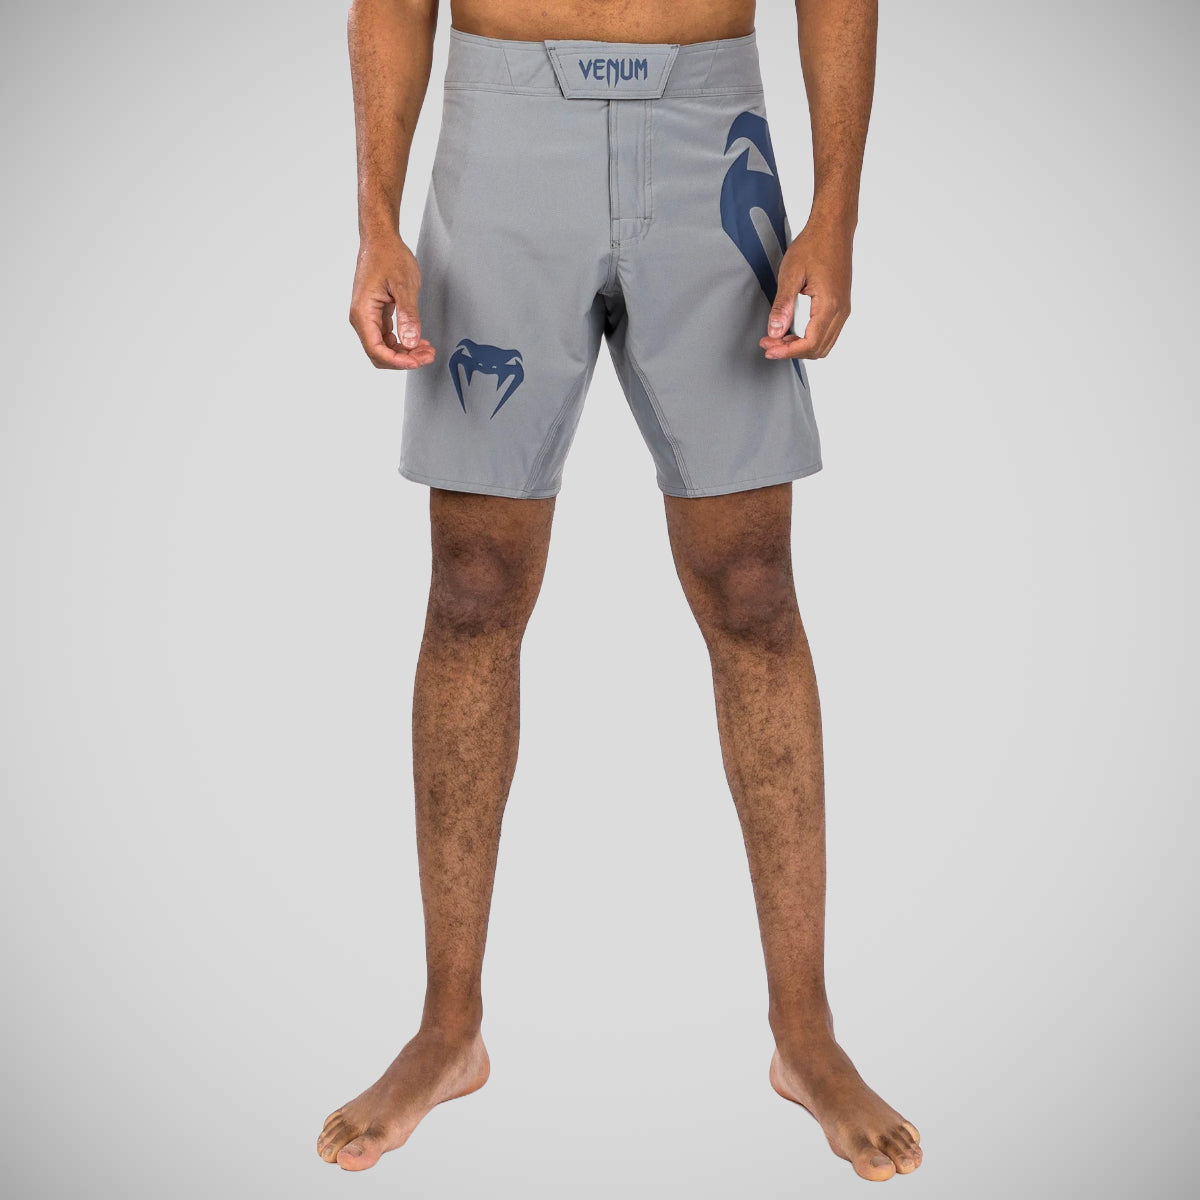 HighType Fight Shorts, Spats --MMA Fighter-- High Quality made in EU MMA  NO-GI